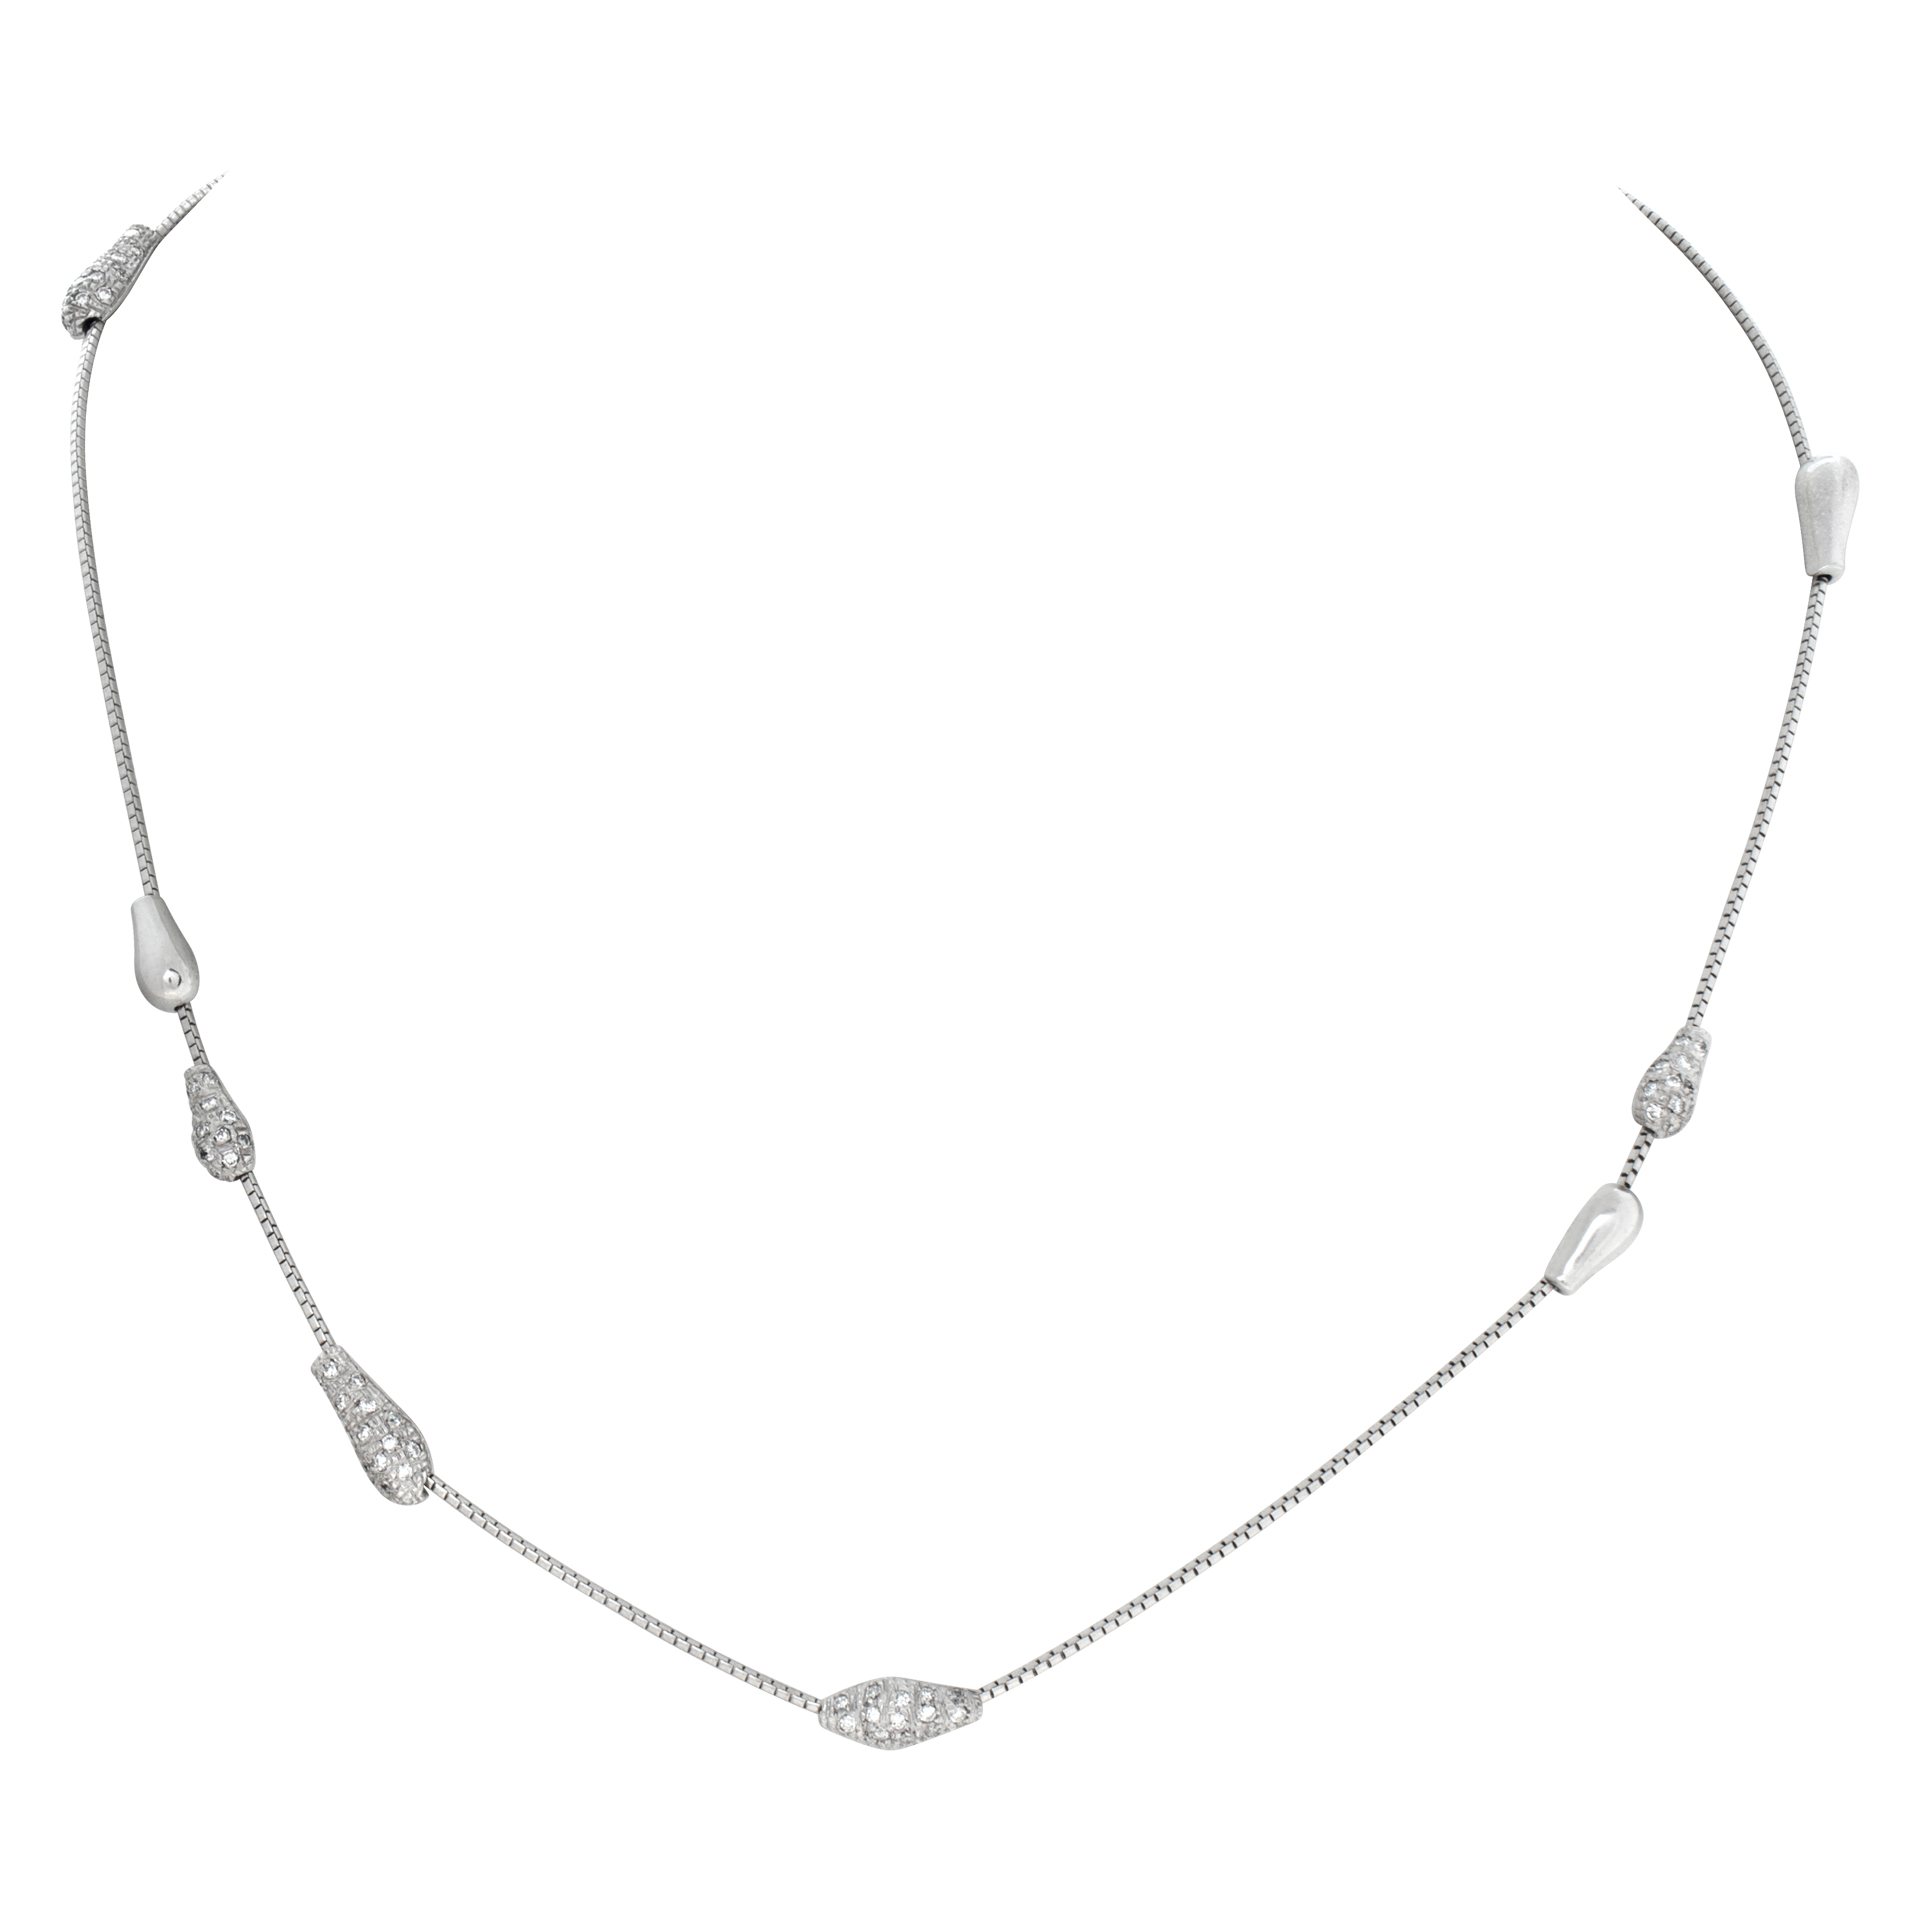 Designer signed Henry Stern diamonds necklace set in 18K white gold. Round brilliant cut diamonds total approx weight 1.00 carat,